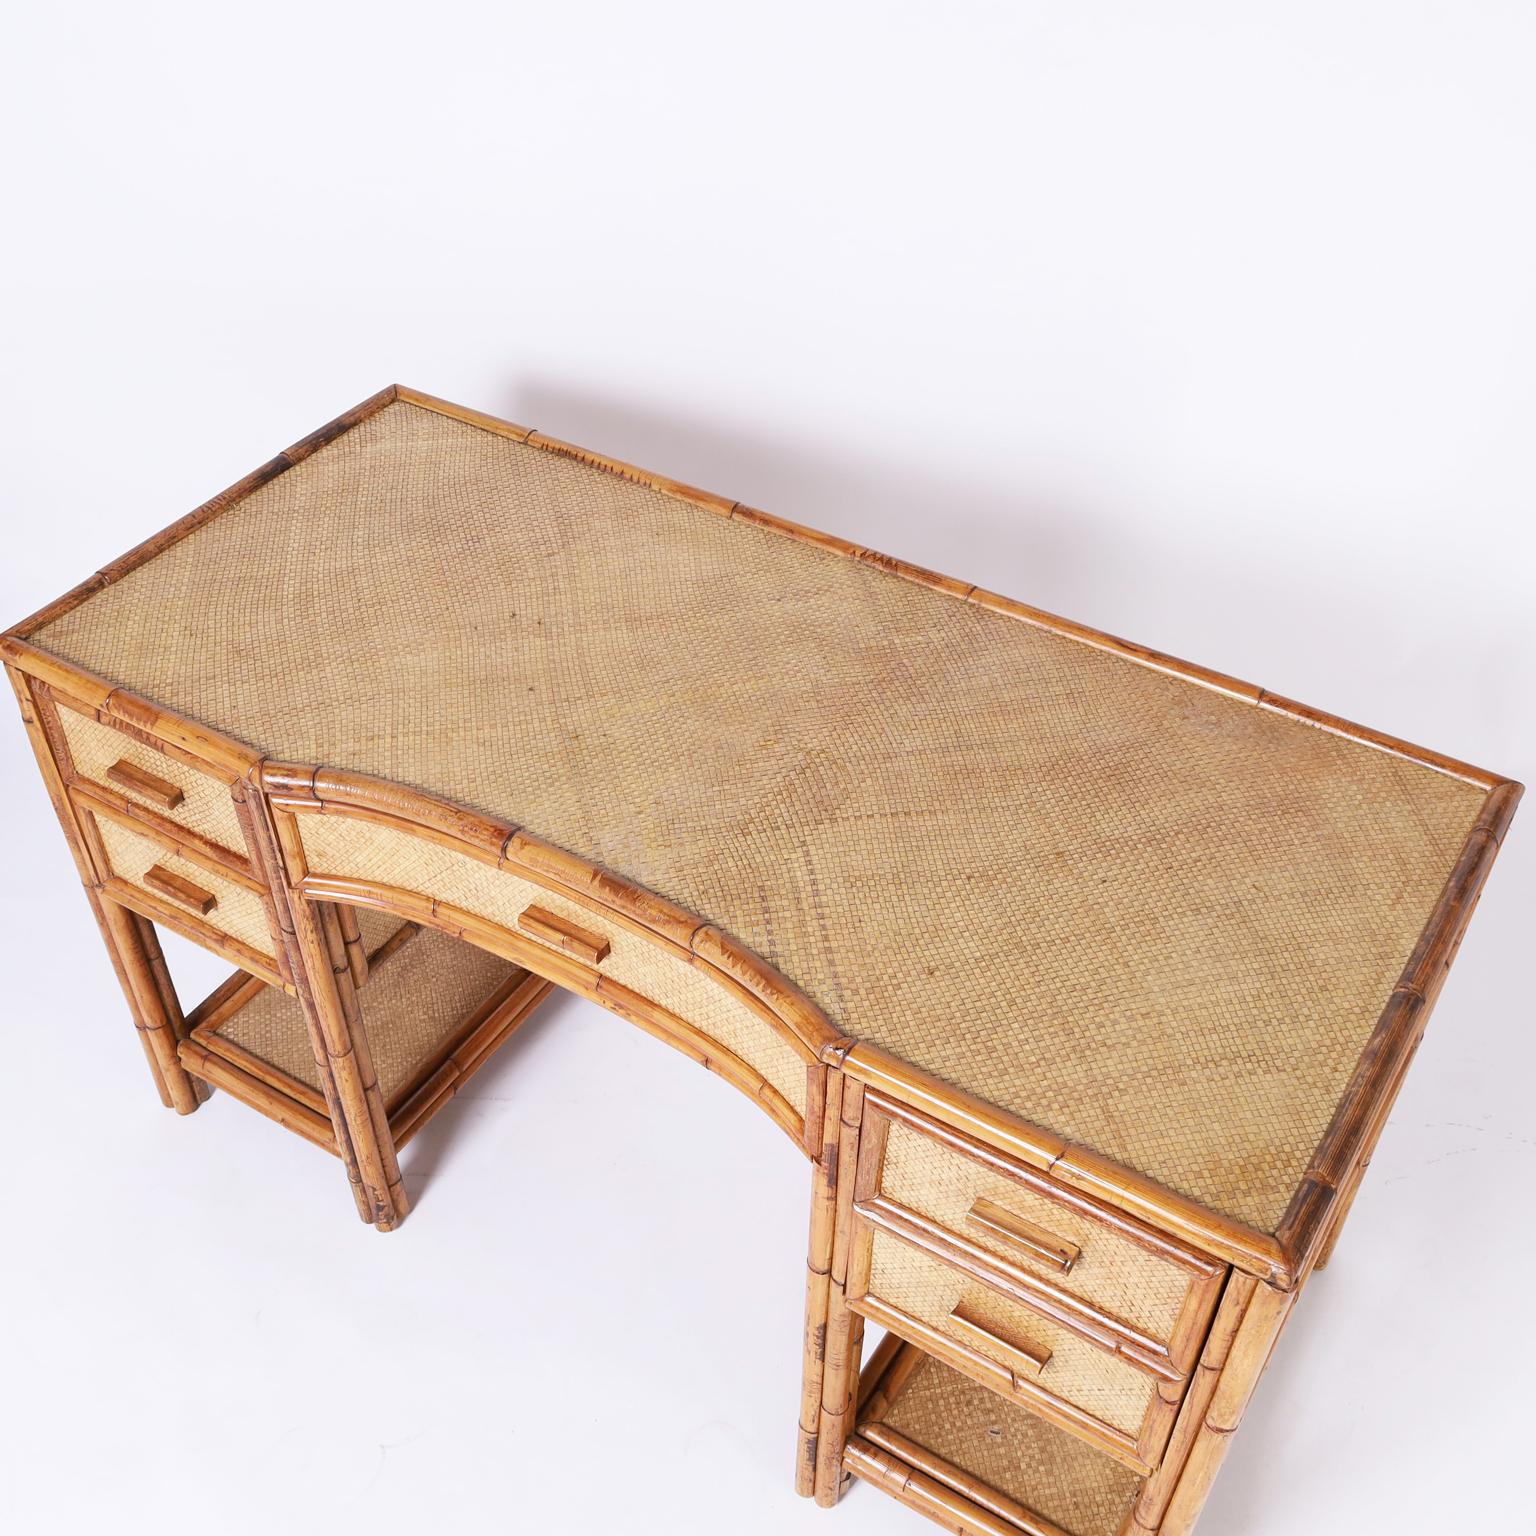 British Colonial Style Vintage Bamboo and Grasscloth Desk In Good Condition For Sale In Palm Beach, FL